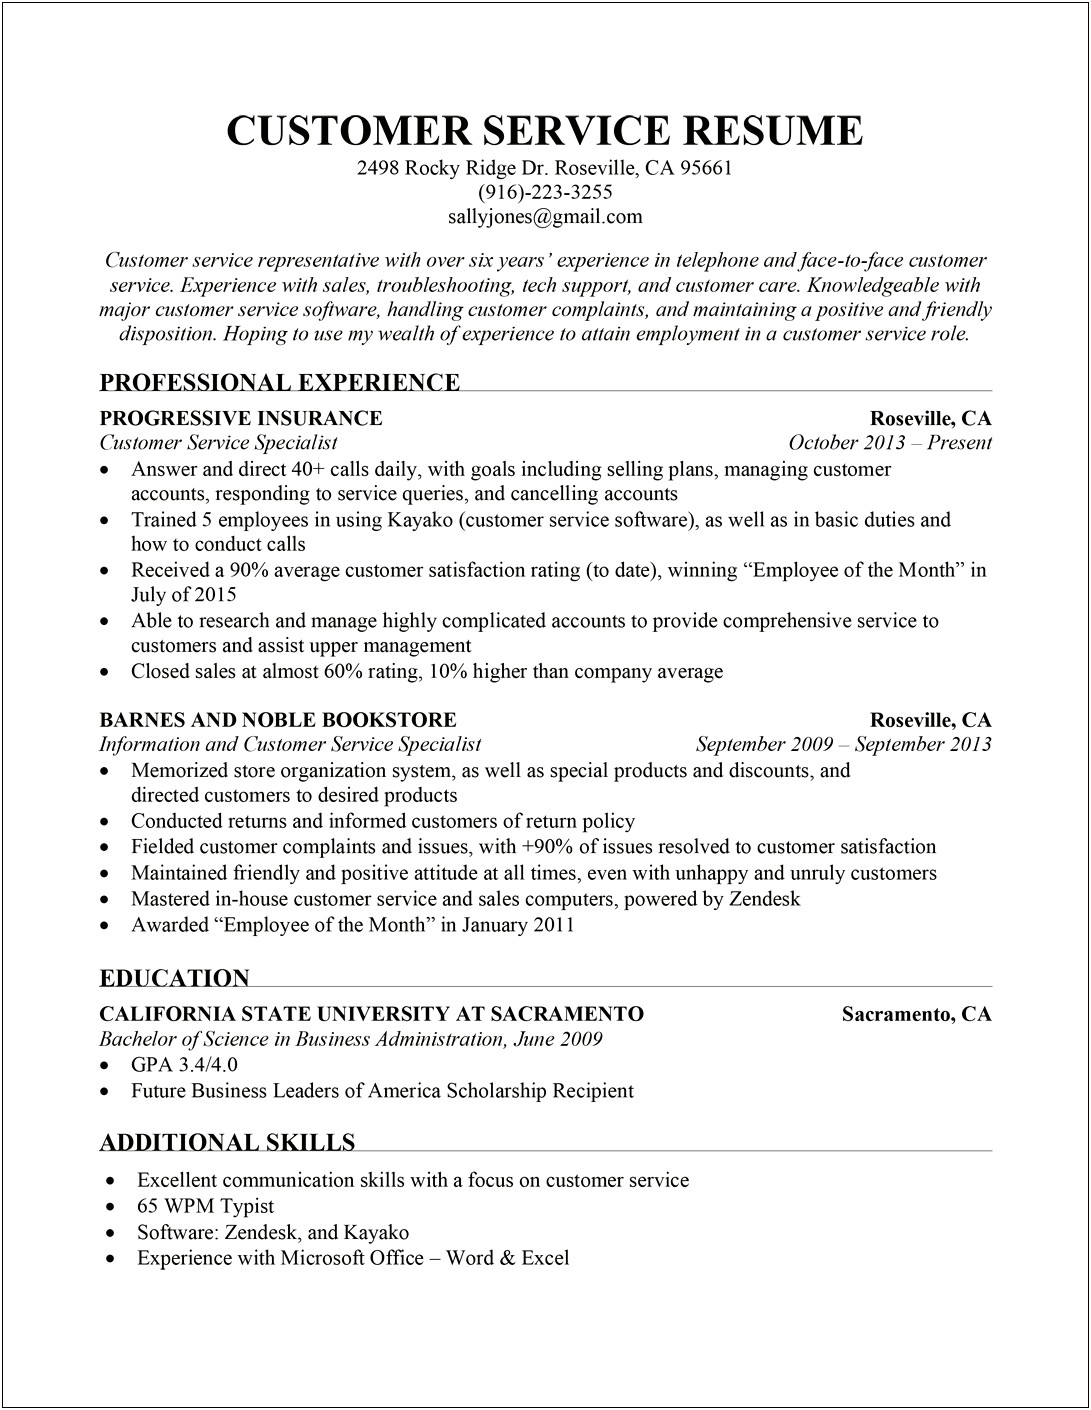 Customer Service Experience Written On A Resume